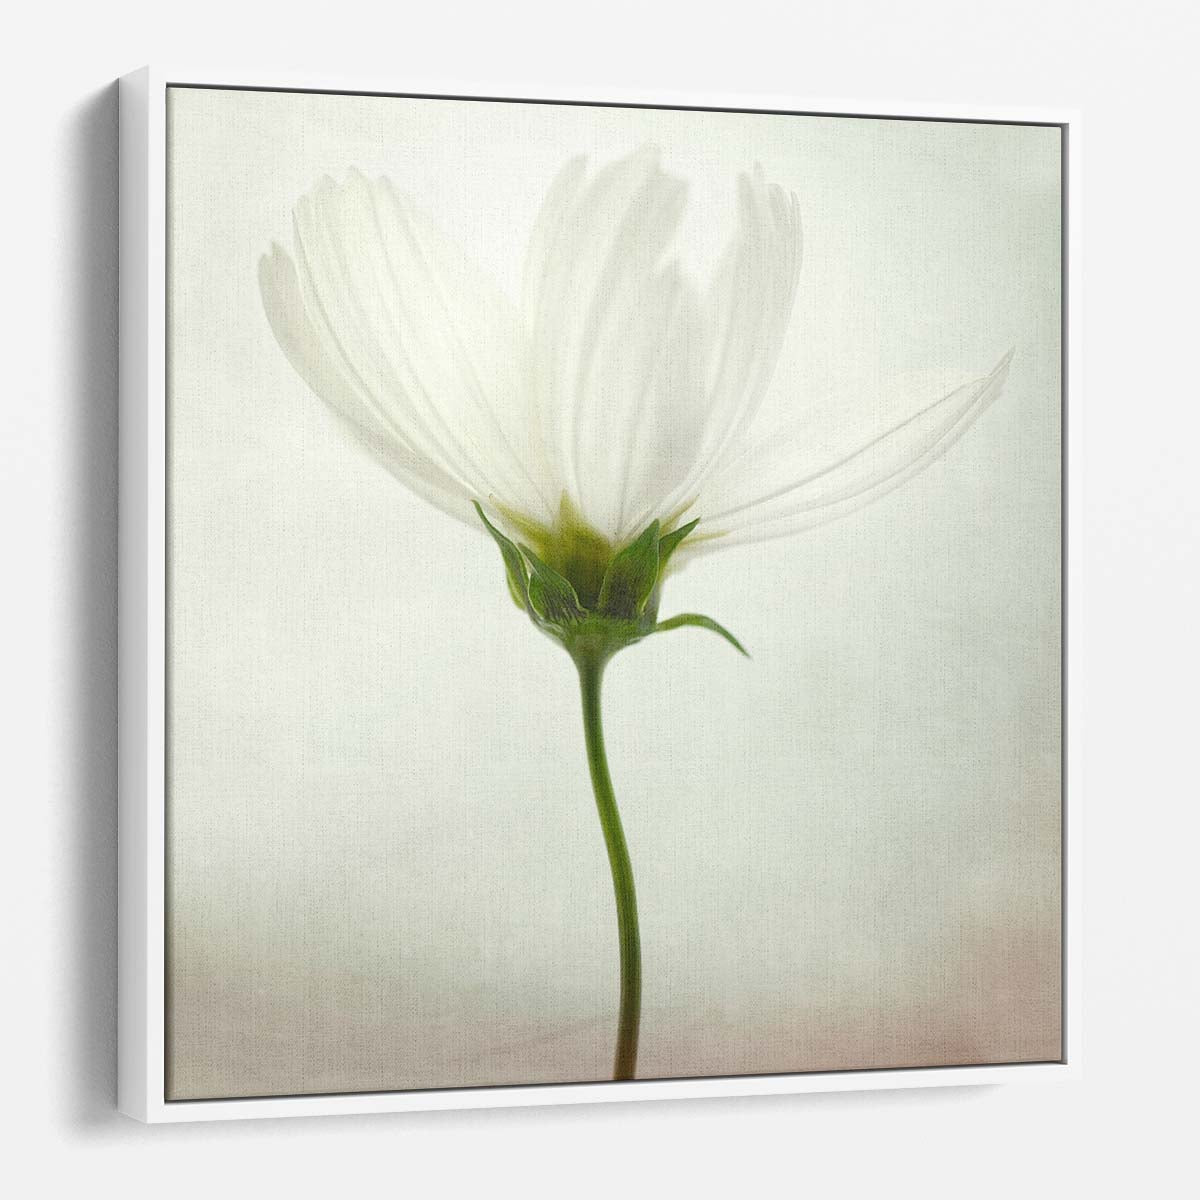 Bright and Delicate White Cosmos Flower Floral Photography Wall Art by Luxuriance Designs. Made in USA.